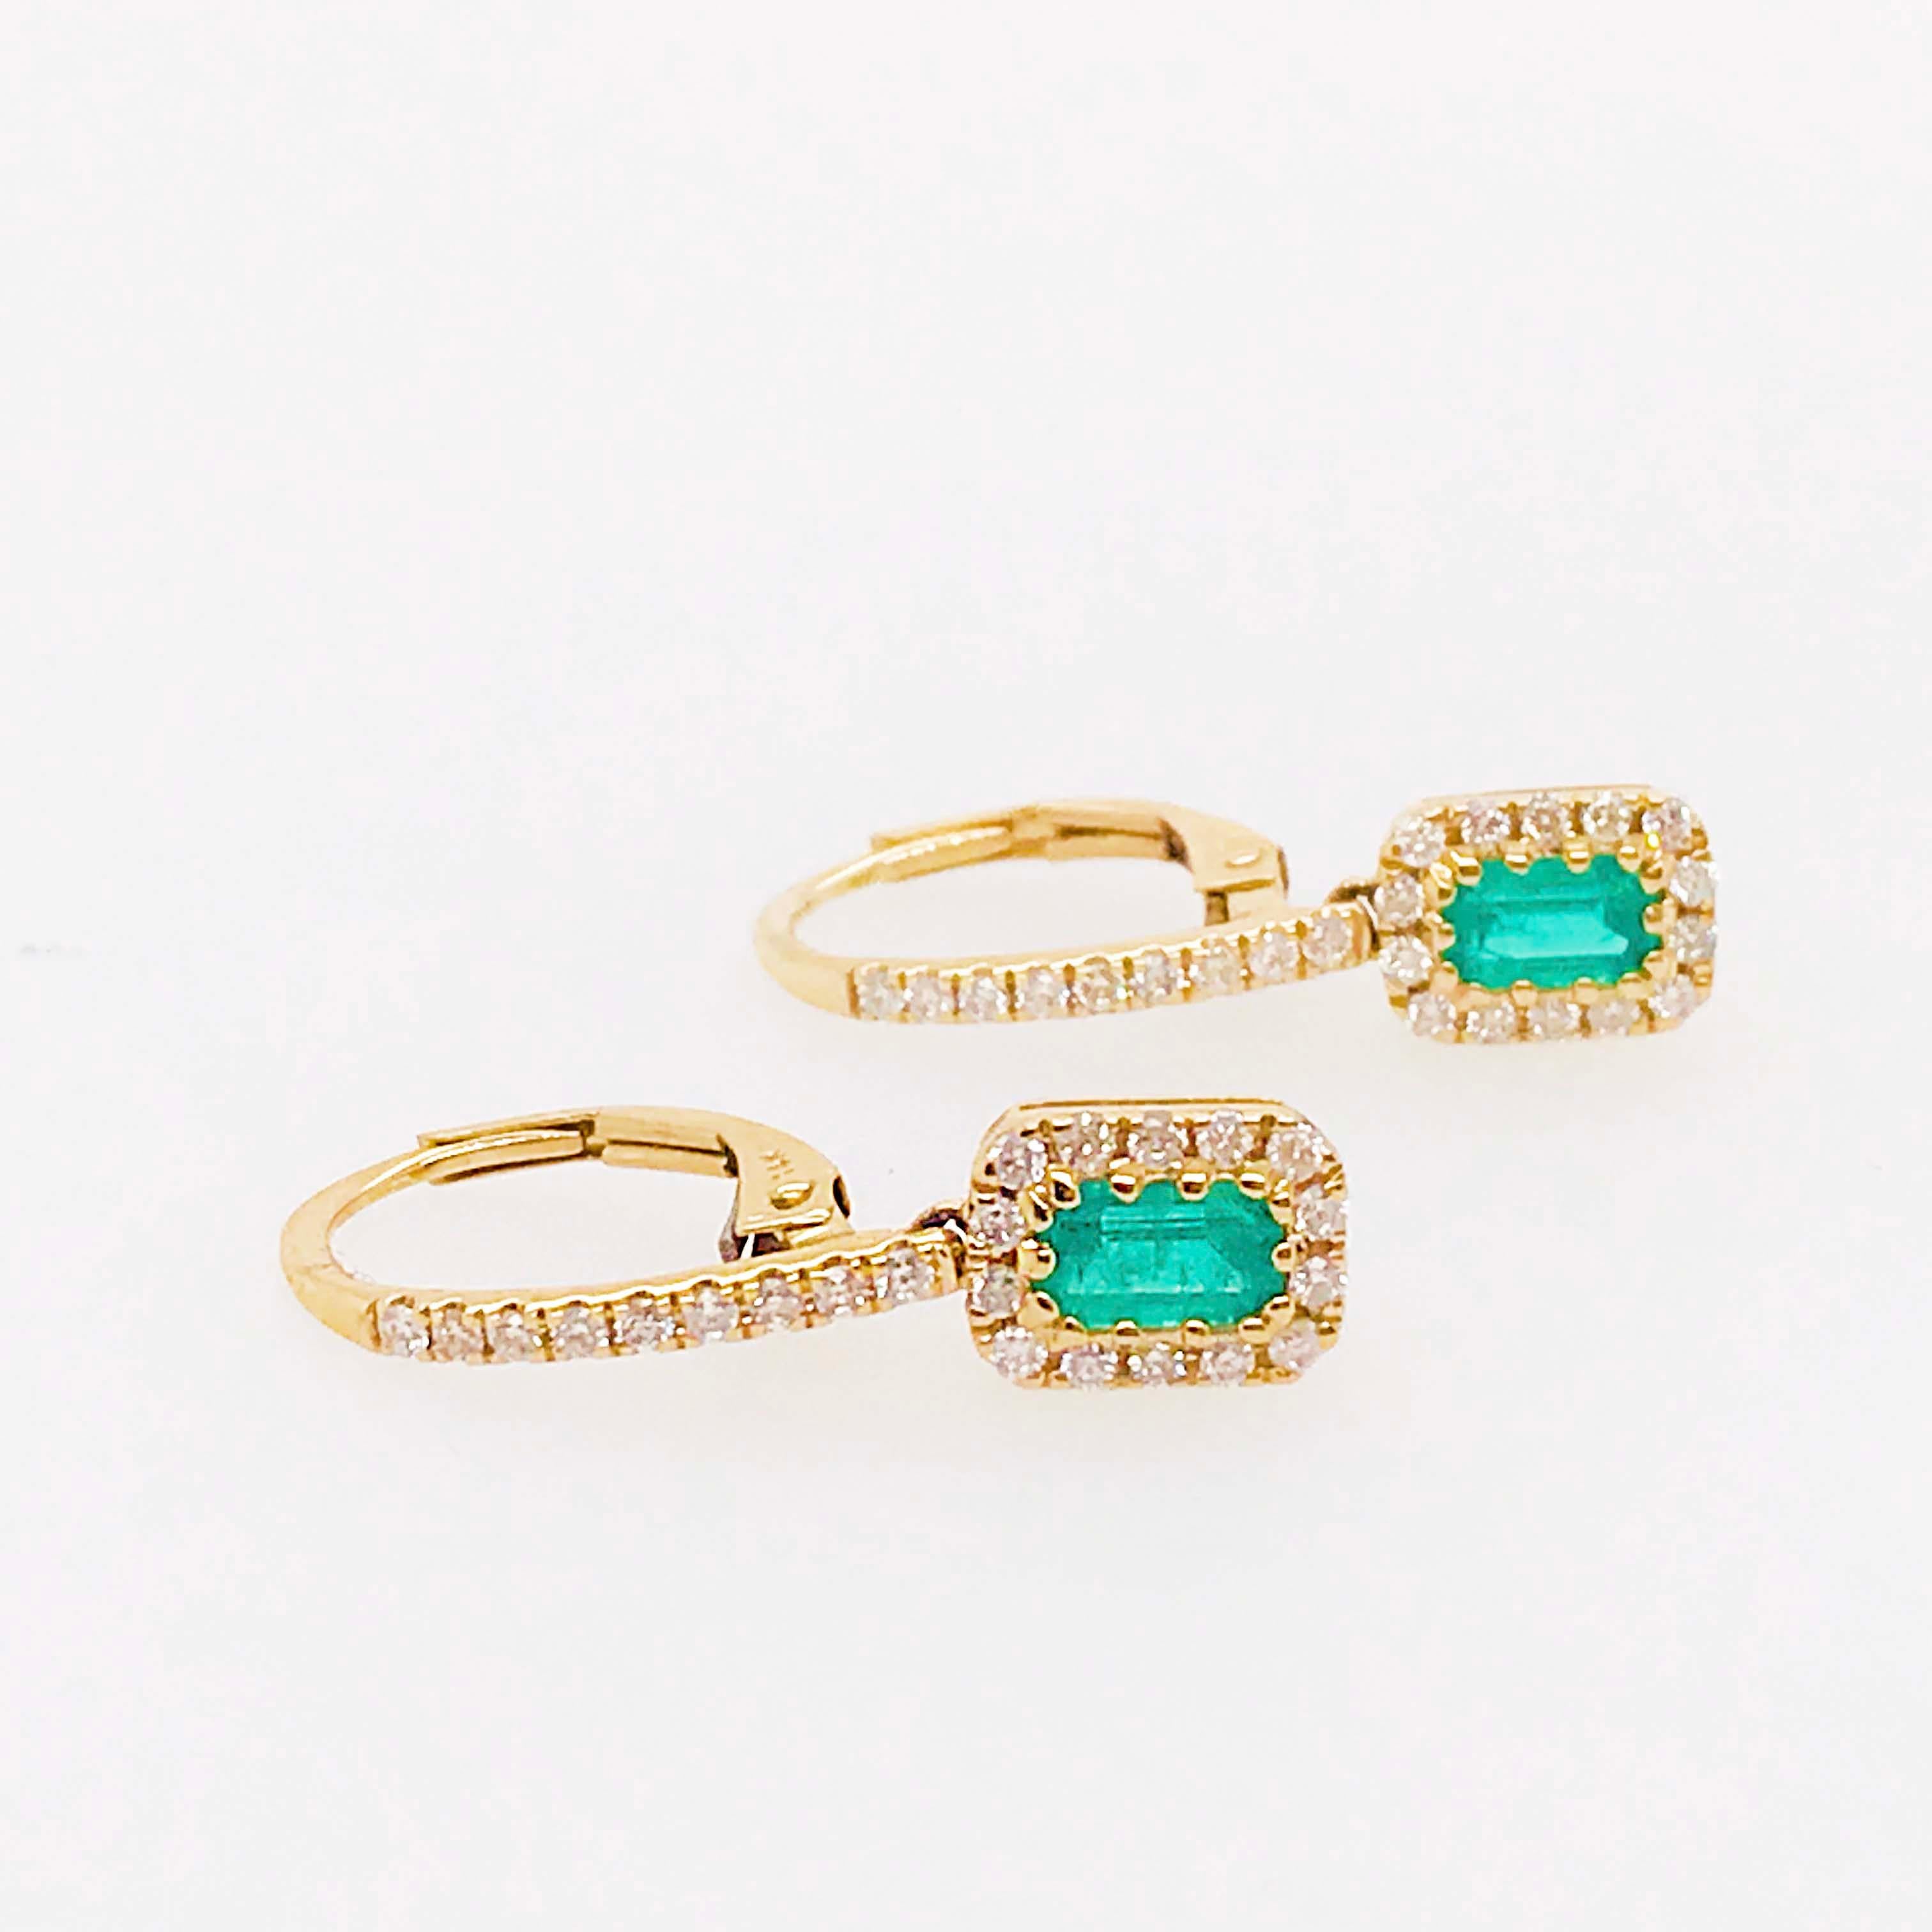 The gorgeous 14 karat yellow gold, genuine emerald, and diamond earring dangles are so special and stunning! With a natural emerald gemstone set in each earring. The emerald gemstones have been cut into emerald shapes. The emerald shape was designed